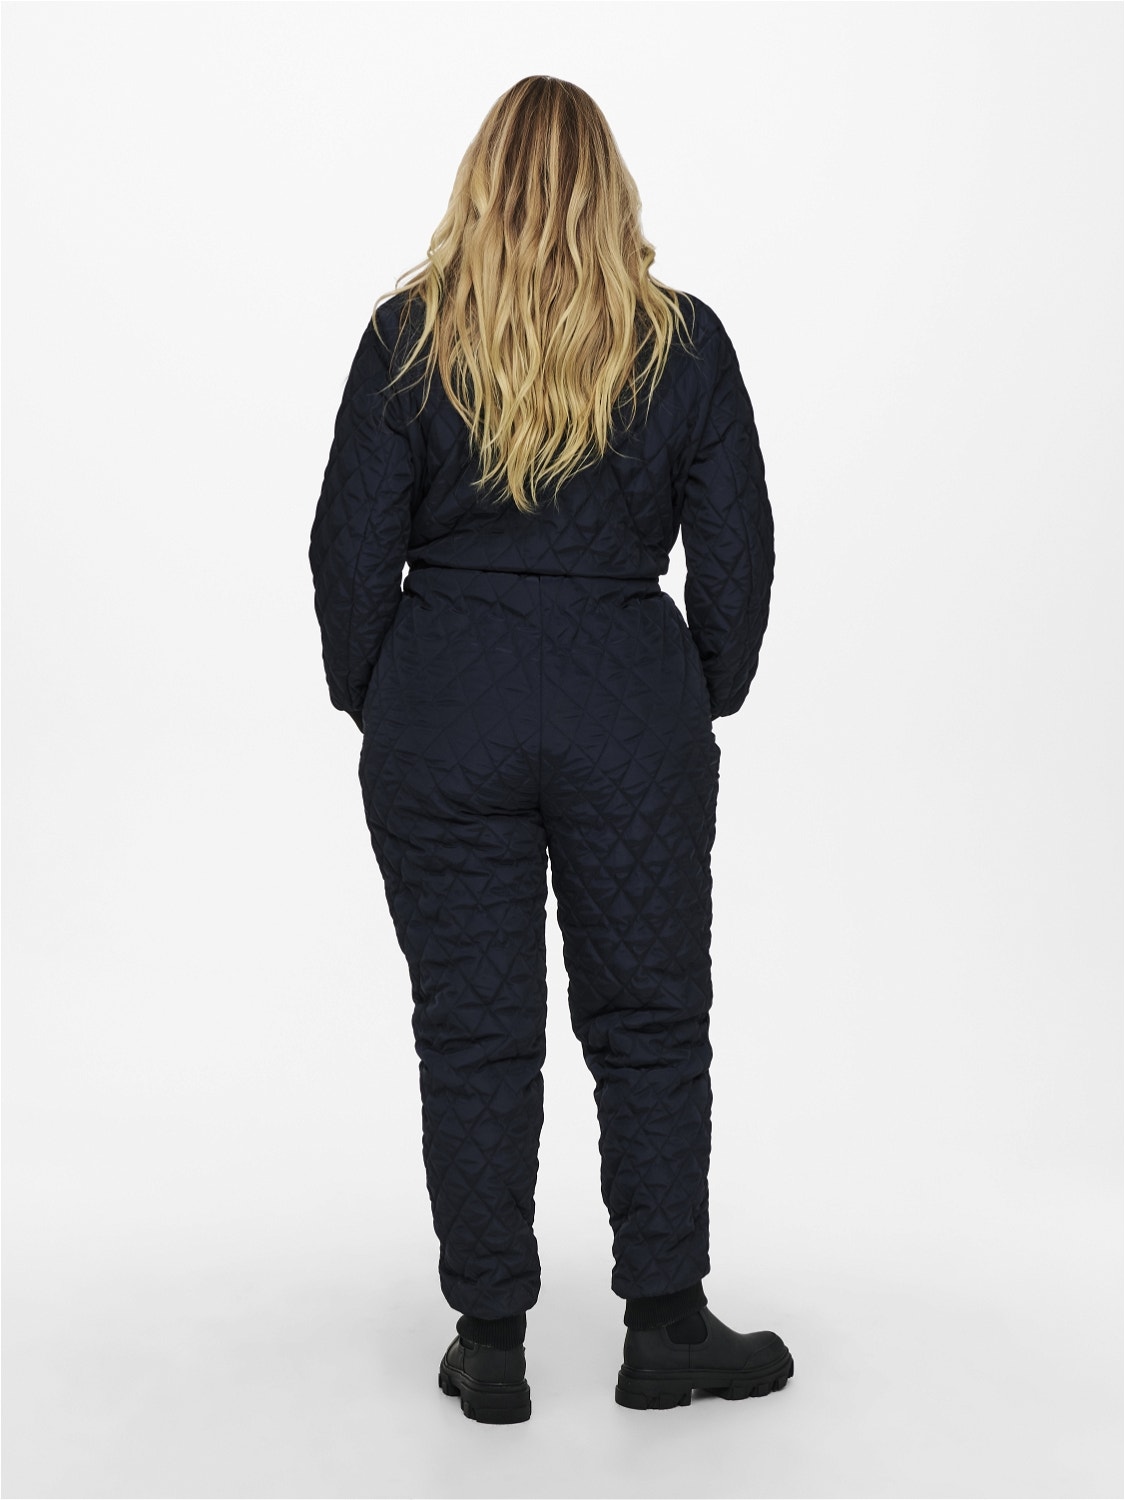 Curvy one piece Jumpsuit with 30% discount!